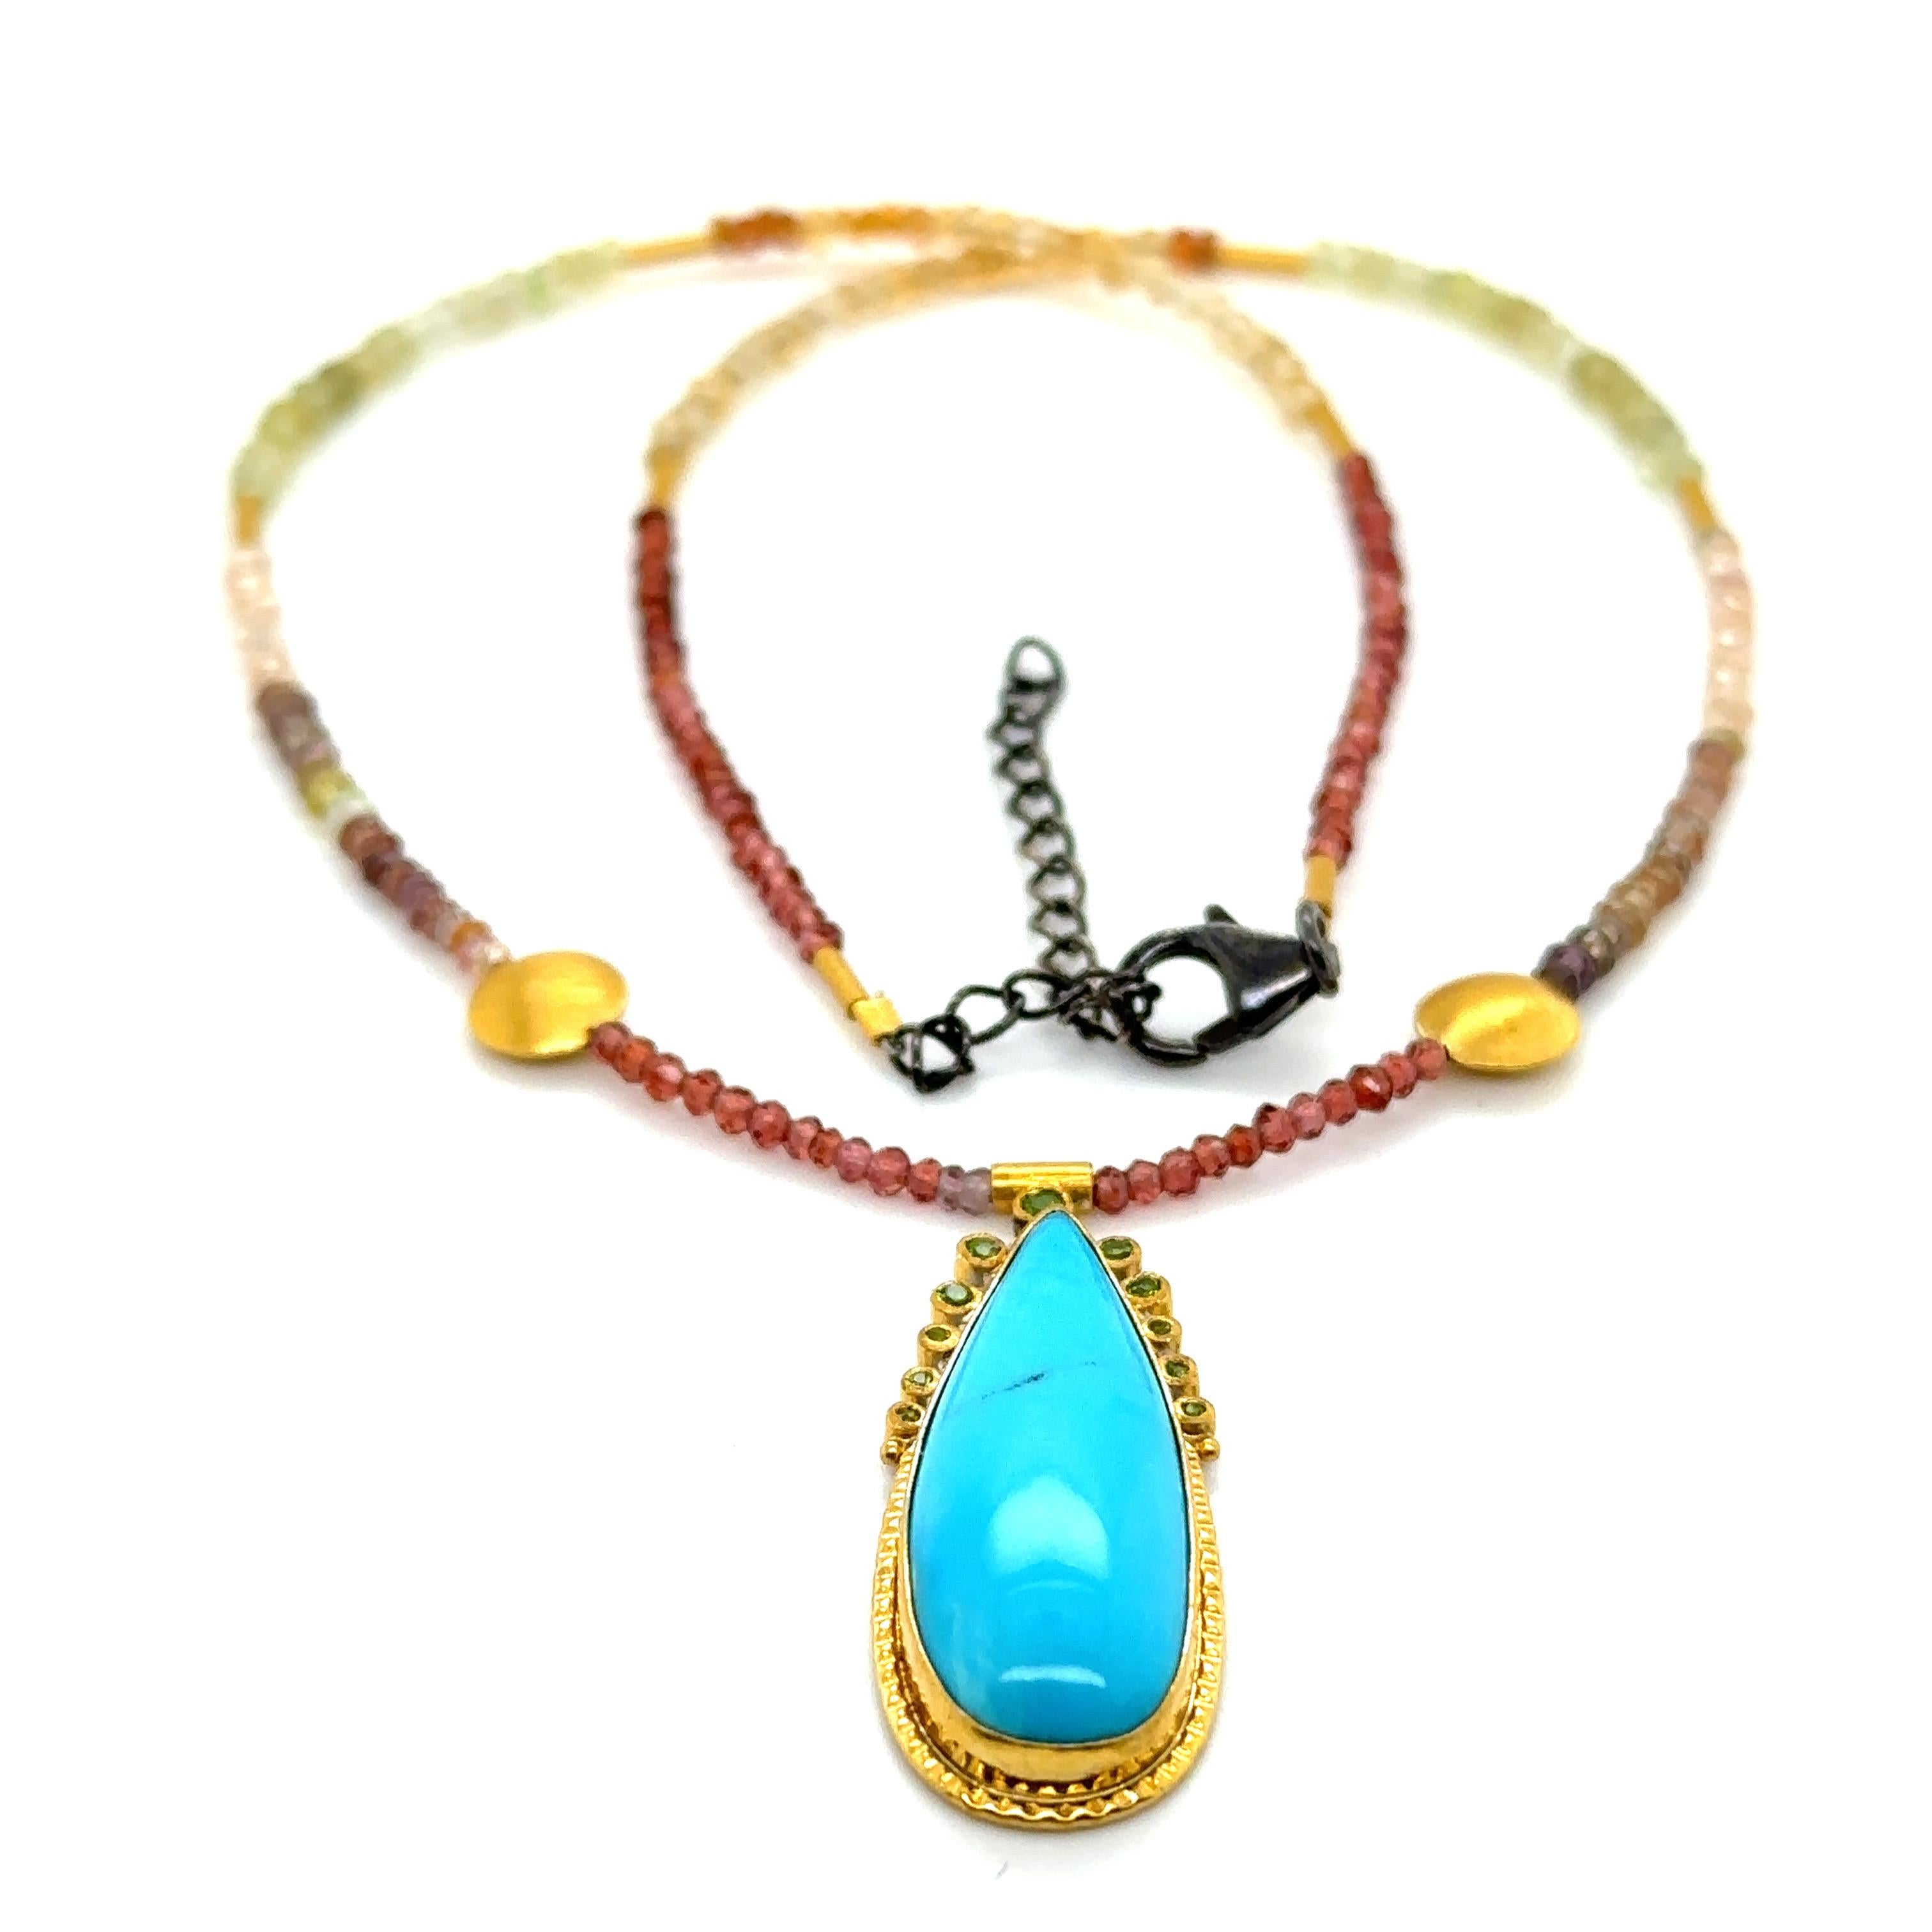 JAS-19-1845 - 24K GOLD/STERLING SILVER w KINGMAN TURQUOISE & MULTI COLOR BEADS For Sale 5